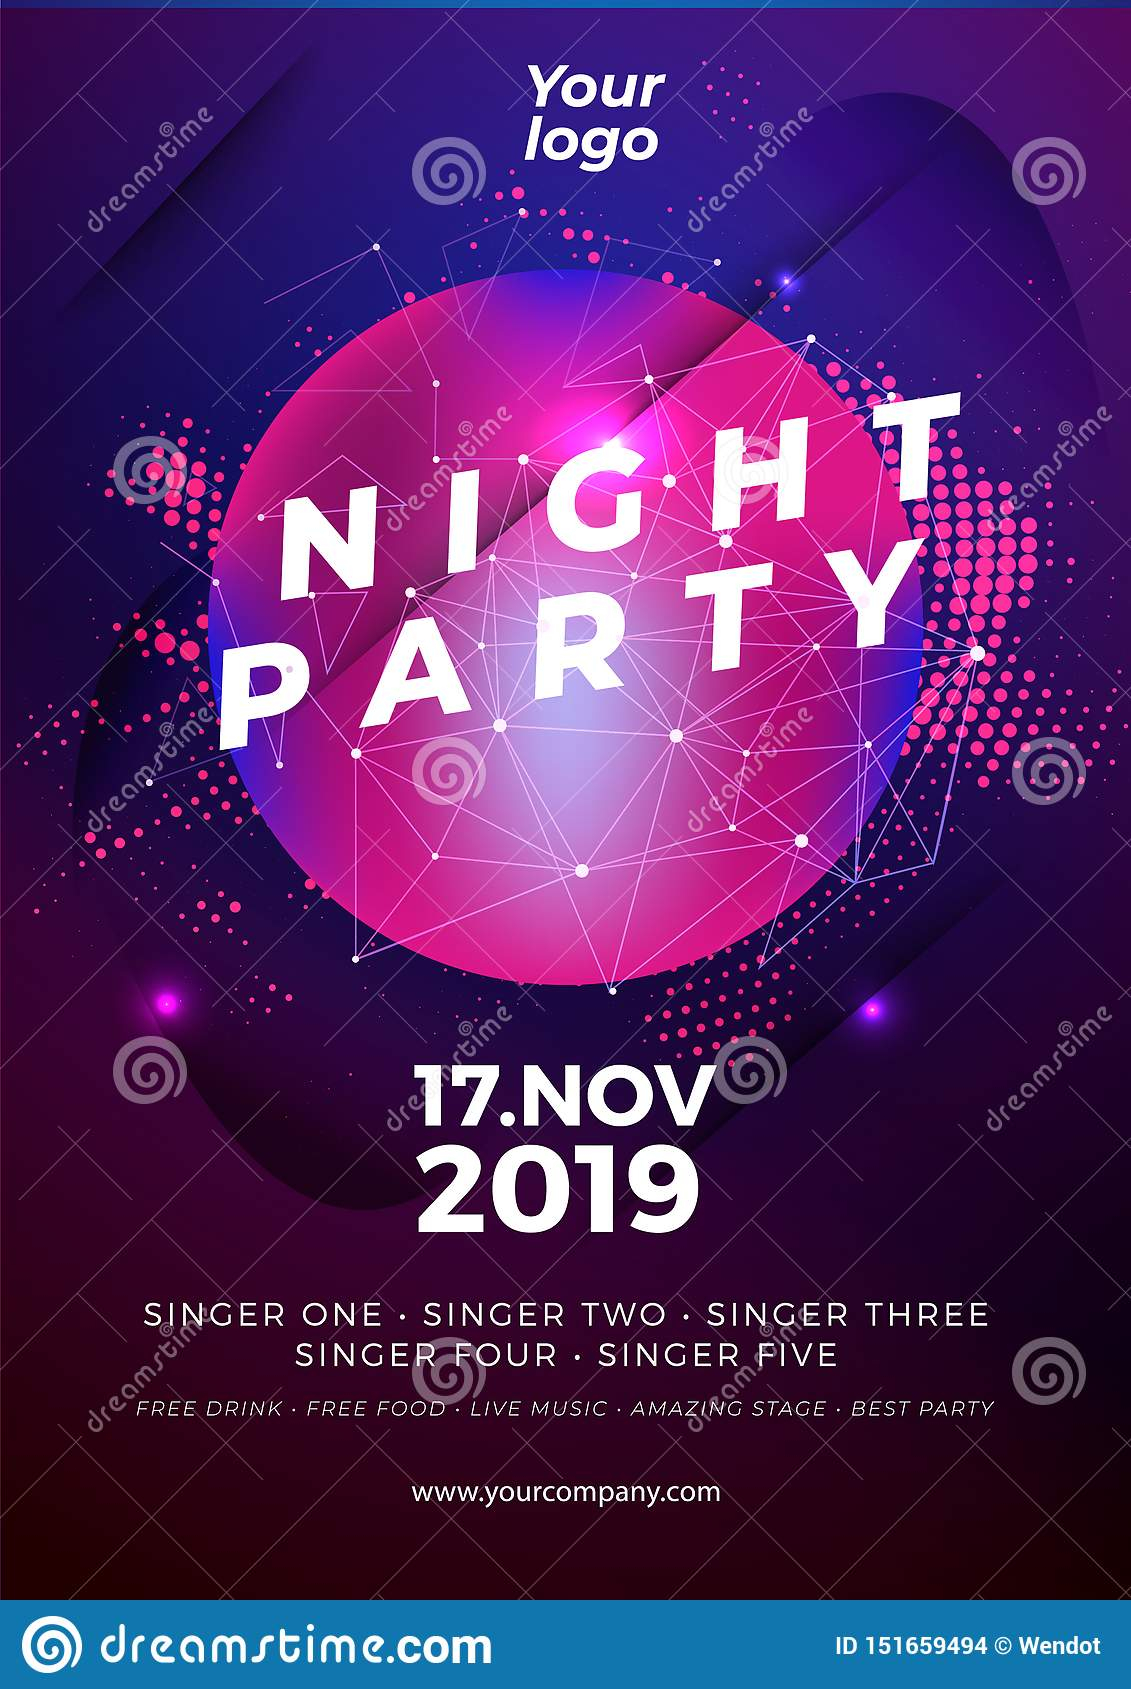 Business Brochure Flyer Design A10 Template Modern Night Party  In Service Industry Night Flyer Template Pertaining To Service Industry Night Flyer Template